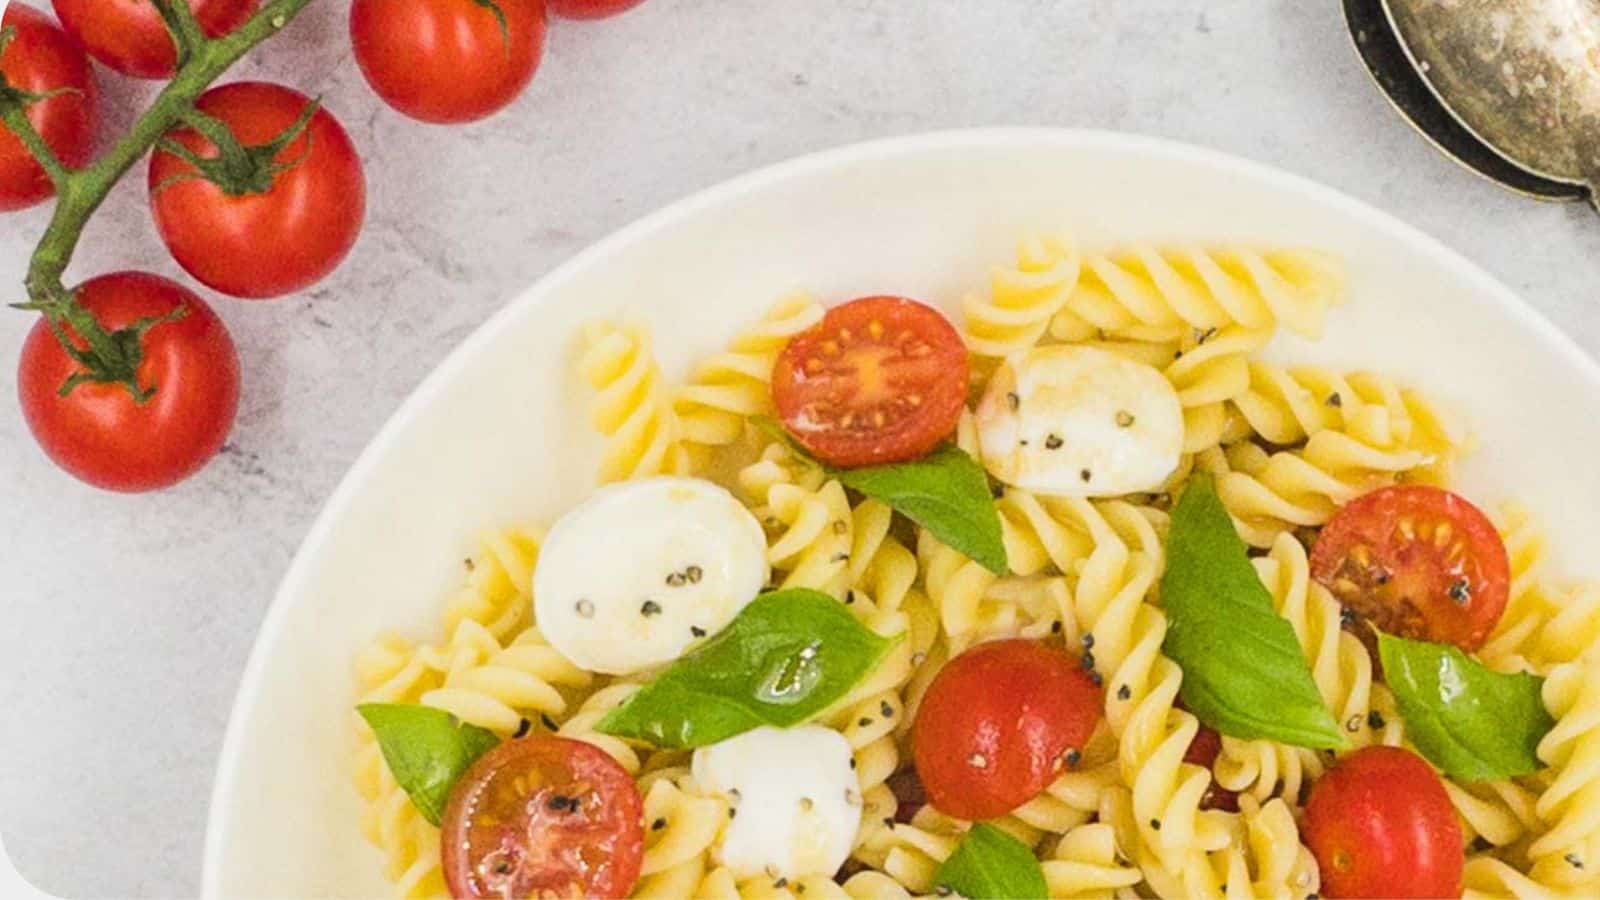 <p>For those who love fresh, Italian-inspired flavors, this salad is a must-try. Caprese Pasta Salad is a vibrant mix of tomatoes, basil, and mozzarella tossed with pasta. It’s a refreshing side or light meal that’s perfect for any outdoor gathering.<br><strong>Get the Recipe: </strong><a href="https://www.splashoftaste.com/caprese-pasta-salad/?utm_source=msn&utm_medium=page&utm_campaign=msn">Caprese Pasta Salad</a></p> <p>The post <a href="https://www.splashoftaste.com/insanely-delicious-side-dish-stars/">Main Course? Who Needs It! 17 Insanely Delicious Side Dish Stars</a> appeared first on <a href="https://www.splashoftaste.com">Splash of Taste - Vegetarian Recipes</a>.</p>